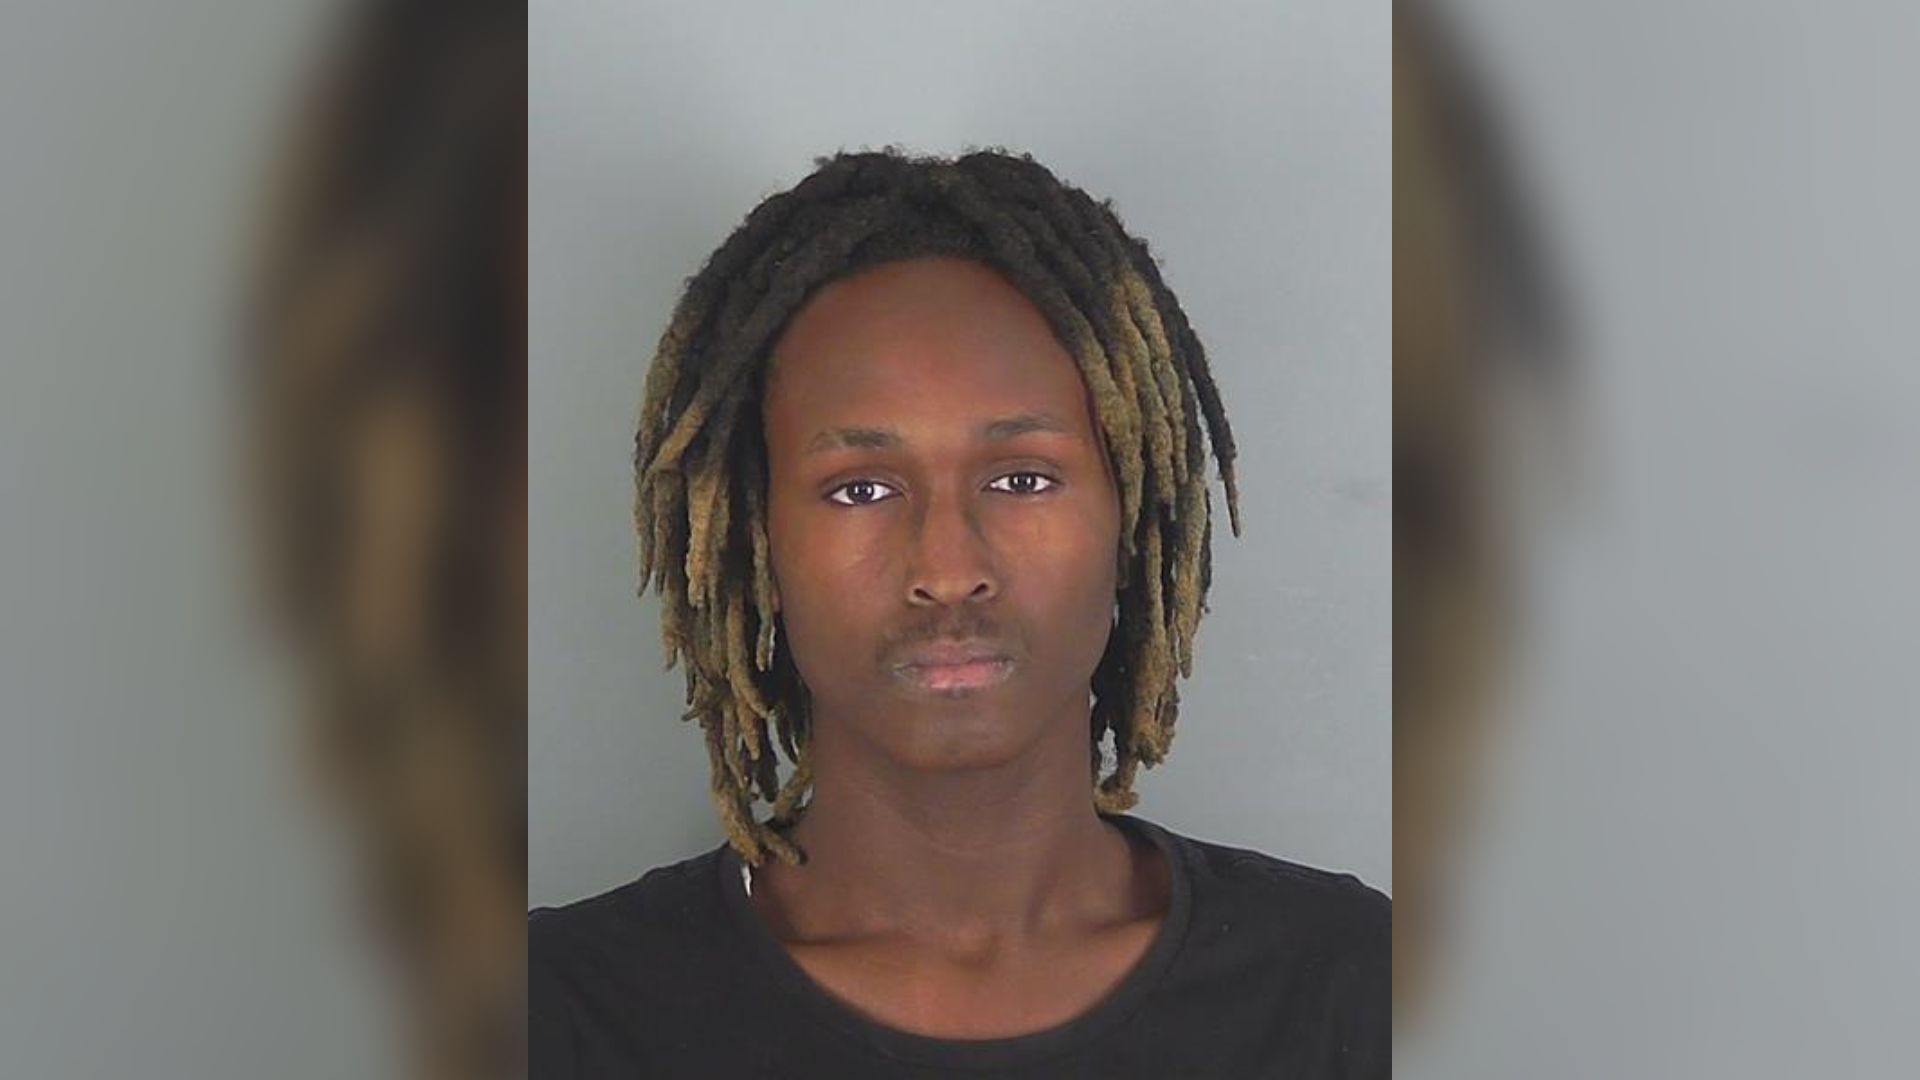 18-year-old arrested on 13 child sex crimes in Spartanburg, deputies say